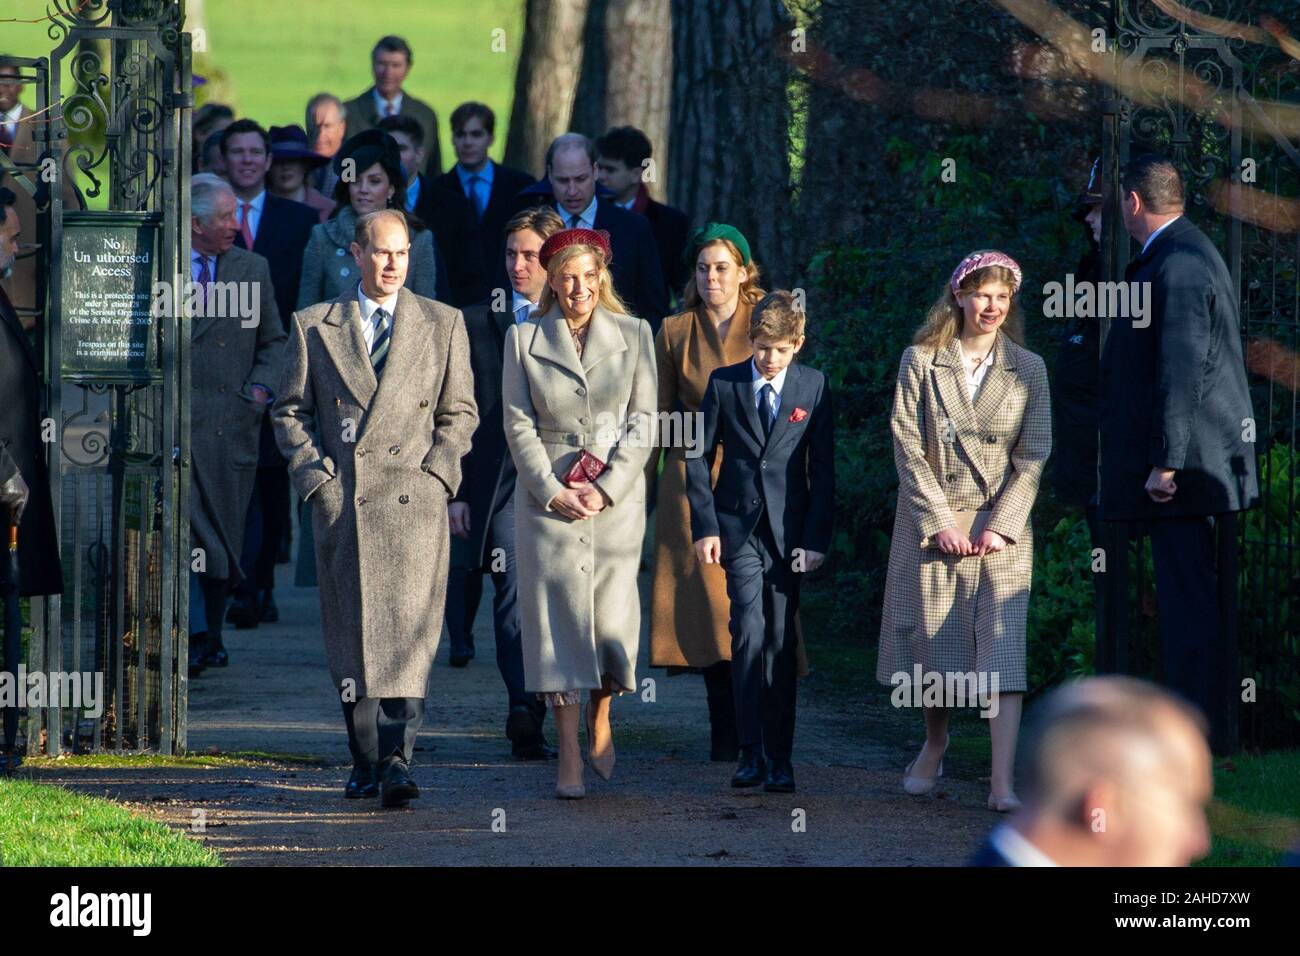 Picture dated December 25th shows Prince Edward and his wife Sophie and children James, Viscount Severn and Lady Louise Windsor at the Christmas Day morning church service at St Mary Magdalene Church in Sandringham, Norfolk.   Prince Andrew kept a low profile as members of the Royal Family attended Christmas Day church services in Sandringham in Norfolk. While a large crowd watched the Queen and family members arrive for the main 11am service, the prince attended an earlier service. Prince Andrew was also absent as family members left the church after the service to greet members of the public Stock Photo